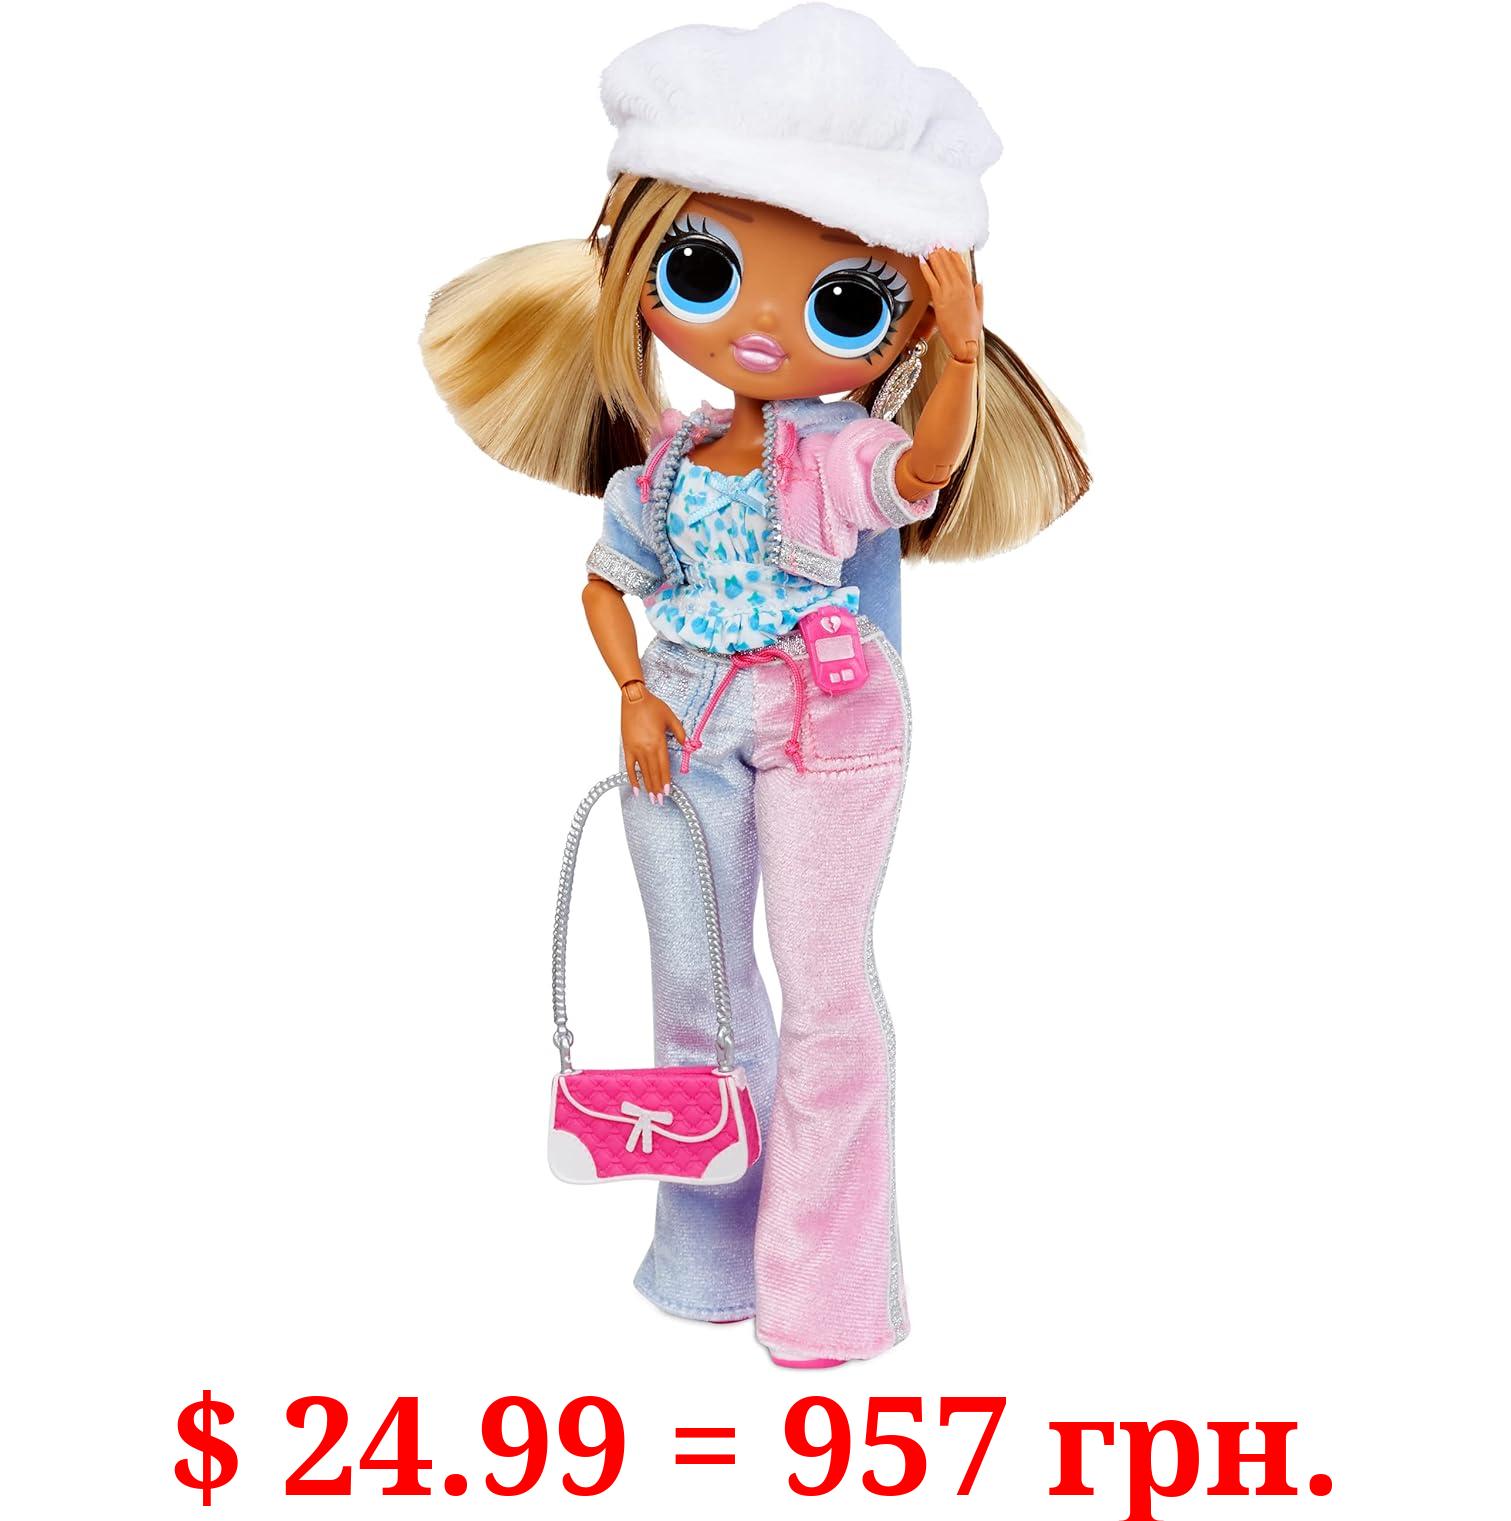 L.O.L. Surprise! LOL Surprise OMG Trendsetter Fashion Doll with 20 Surprises – Great Gift for Kids Ages 4+